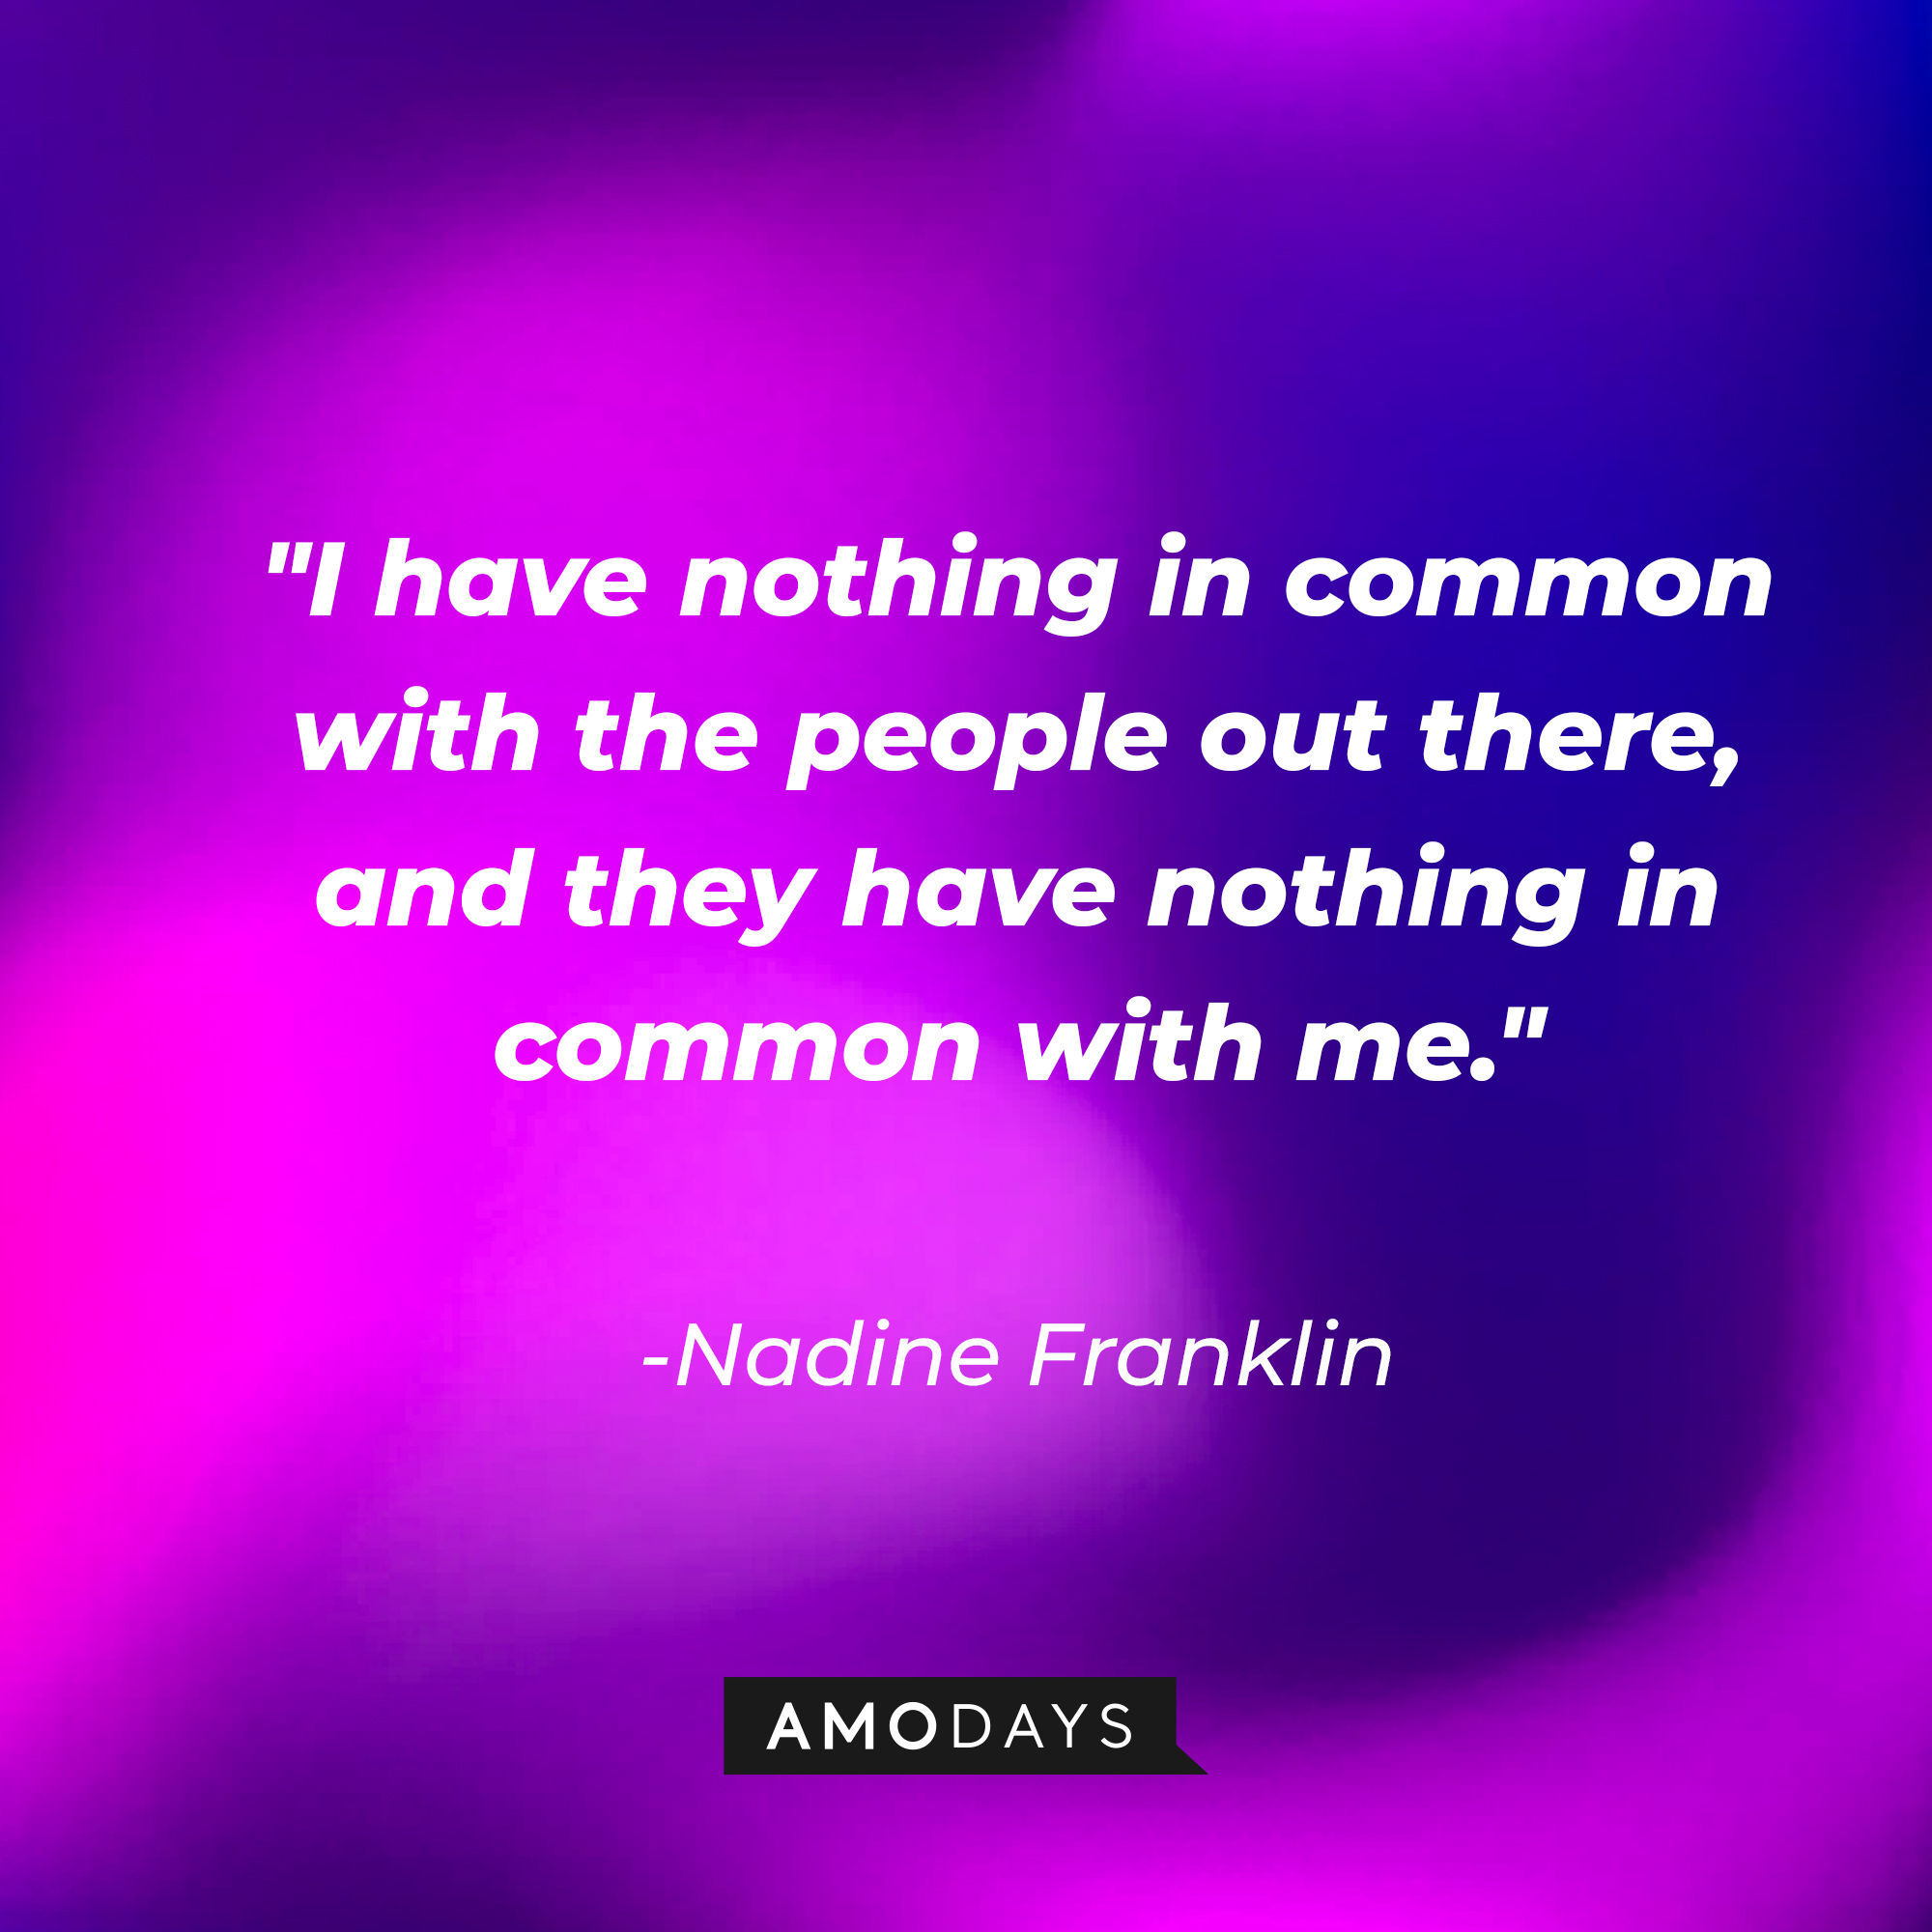 Nadine Franklin's quote: "I have nothing in common with the people out there, and they have nothing in common with me." | Source: AmoDays